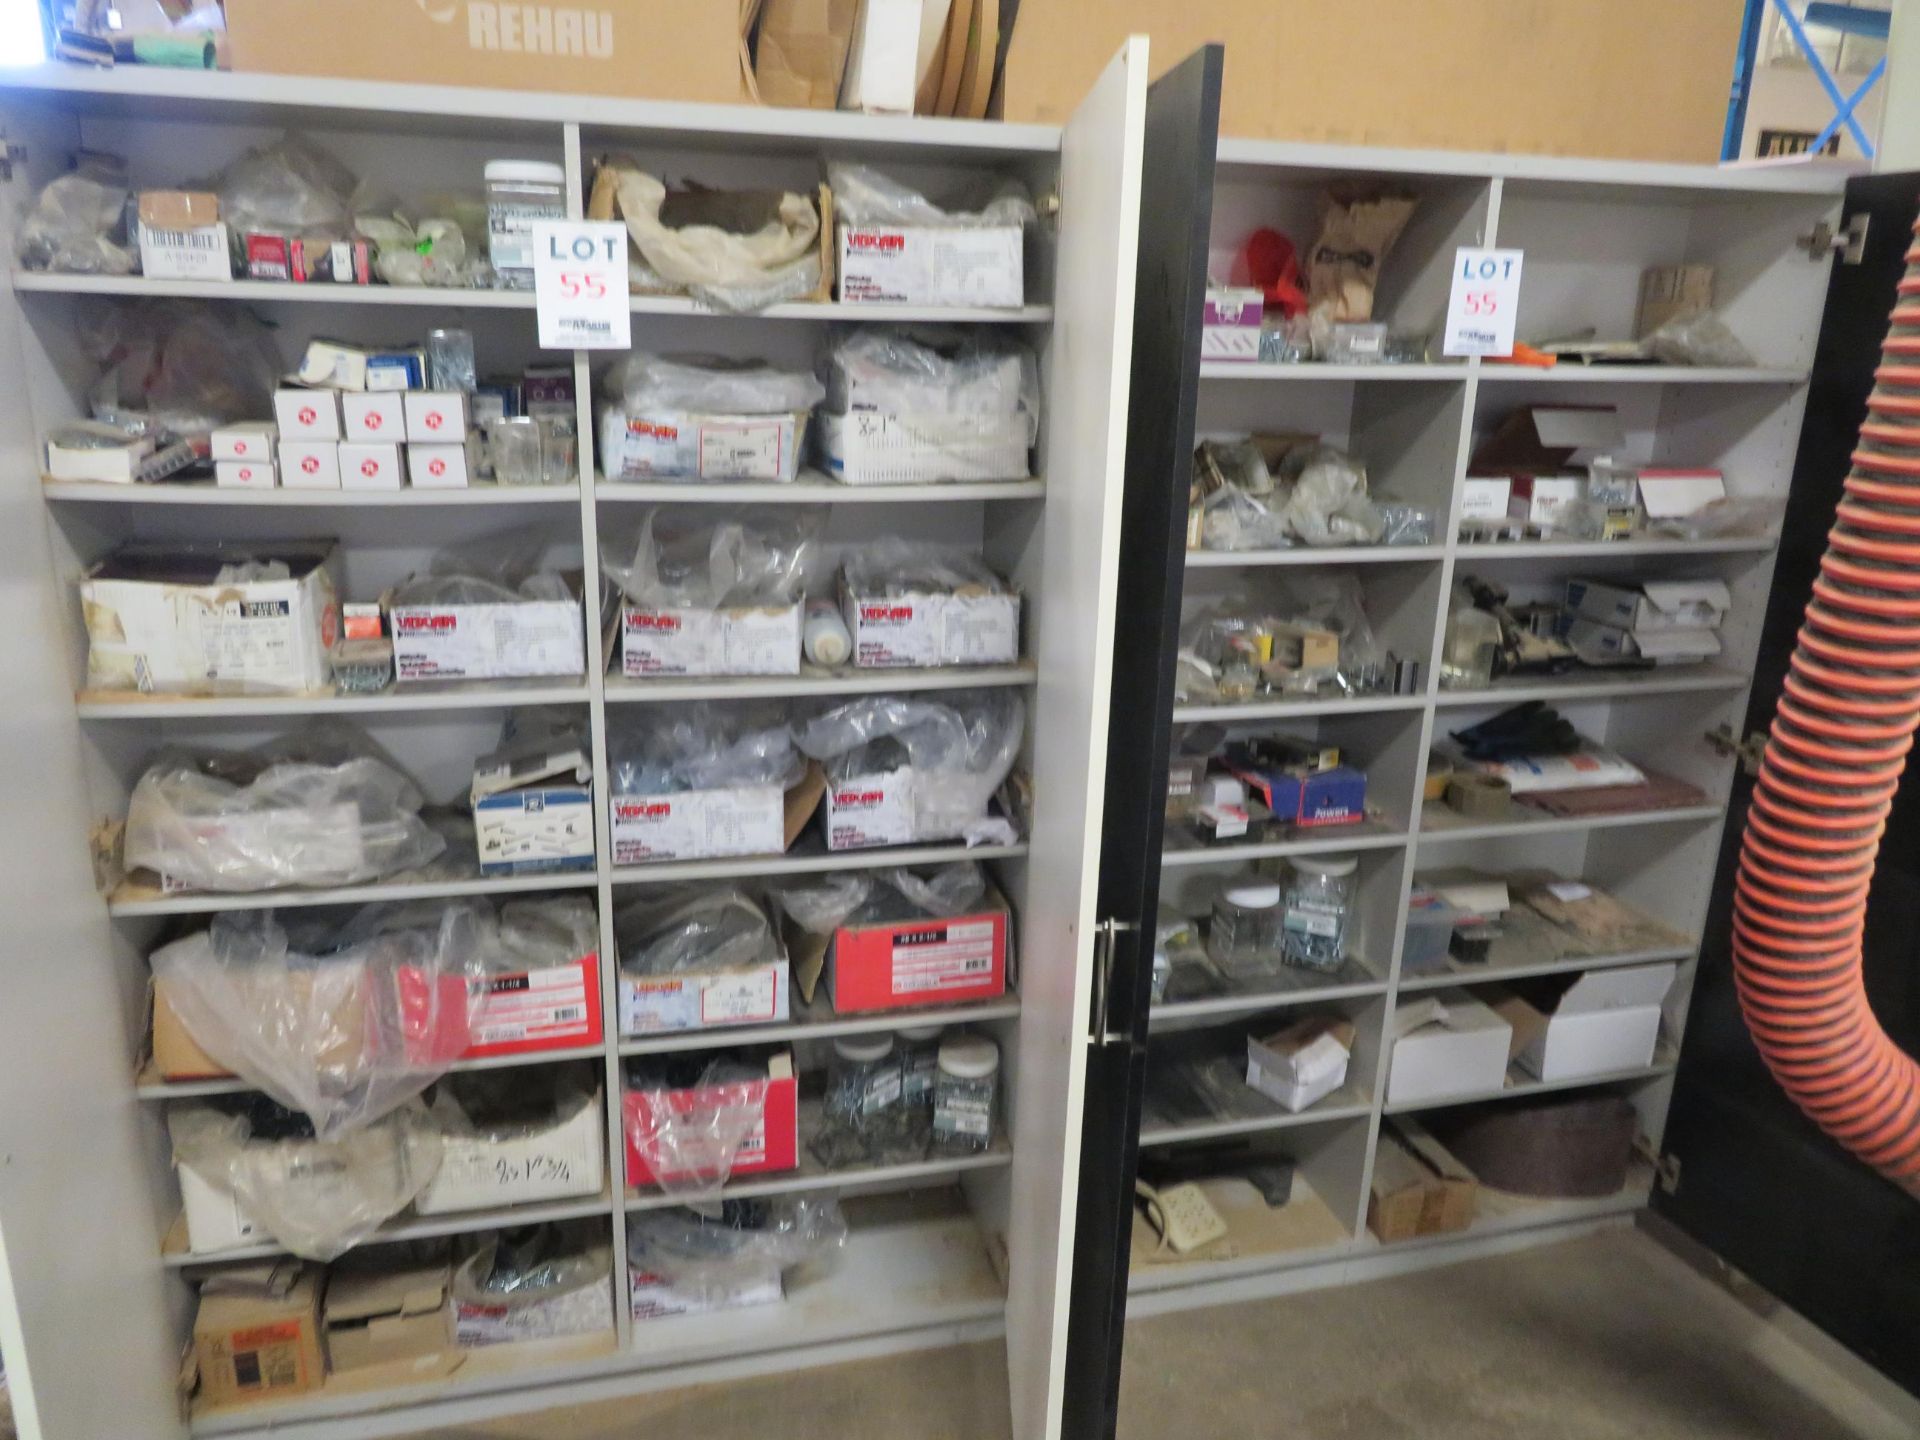 LOT including assorted screws, bolts, etc. with cabinets